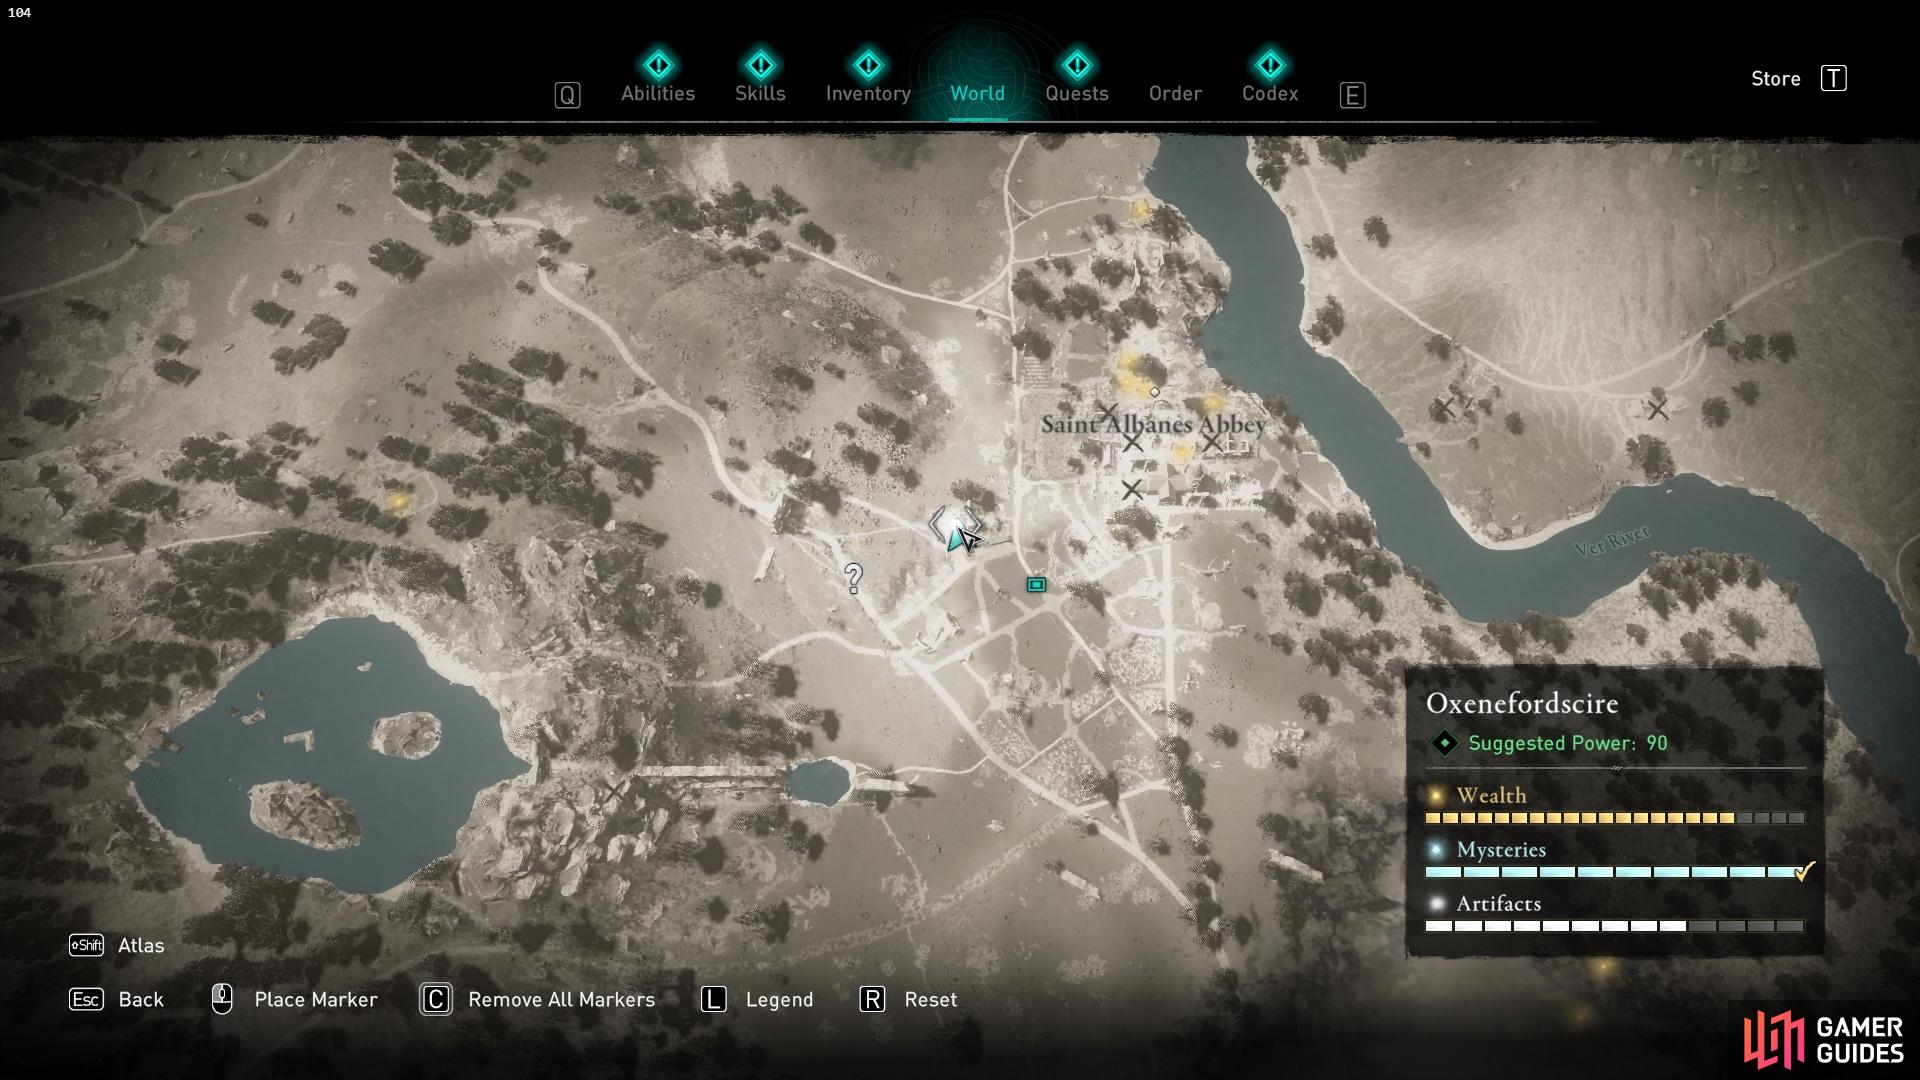 Just southwest of Saint Albanes, you'll be able to grab another artifact